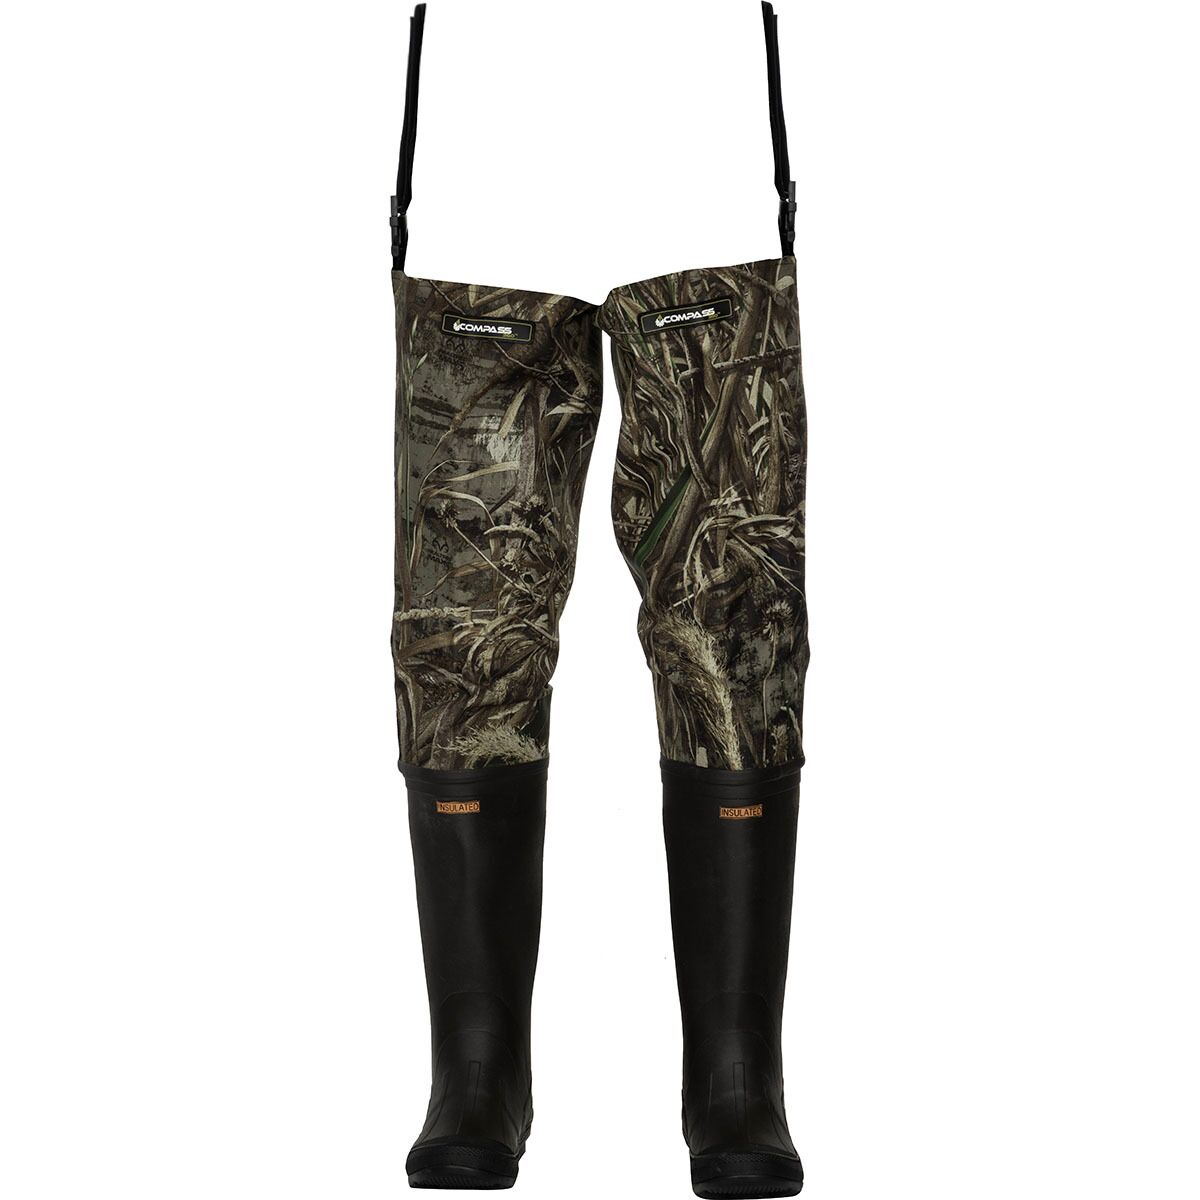 Compass 360 Oxbow Poly Rubber BTFT Max5 Wader - Men's One Color 7.0